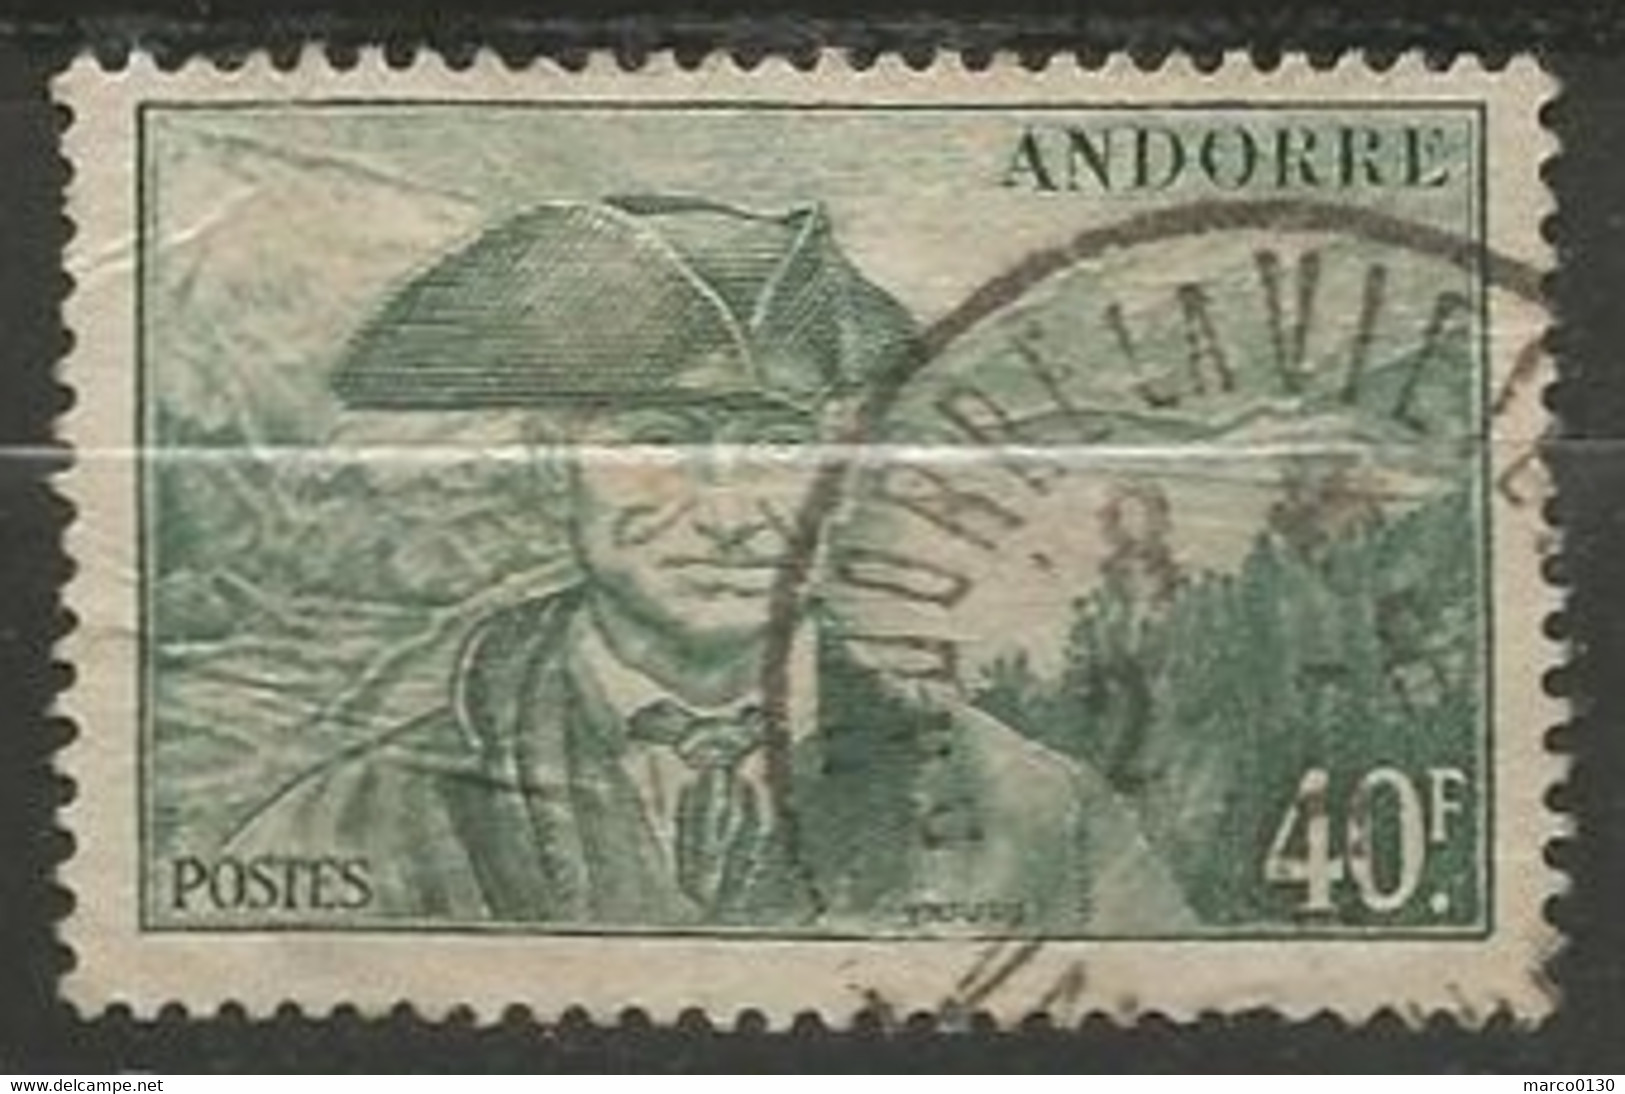 ANDORRE FRANCAIS N° 117 OBLITERE - Used Stamps